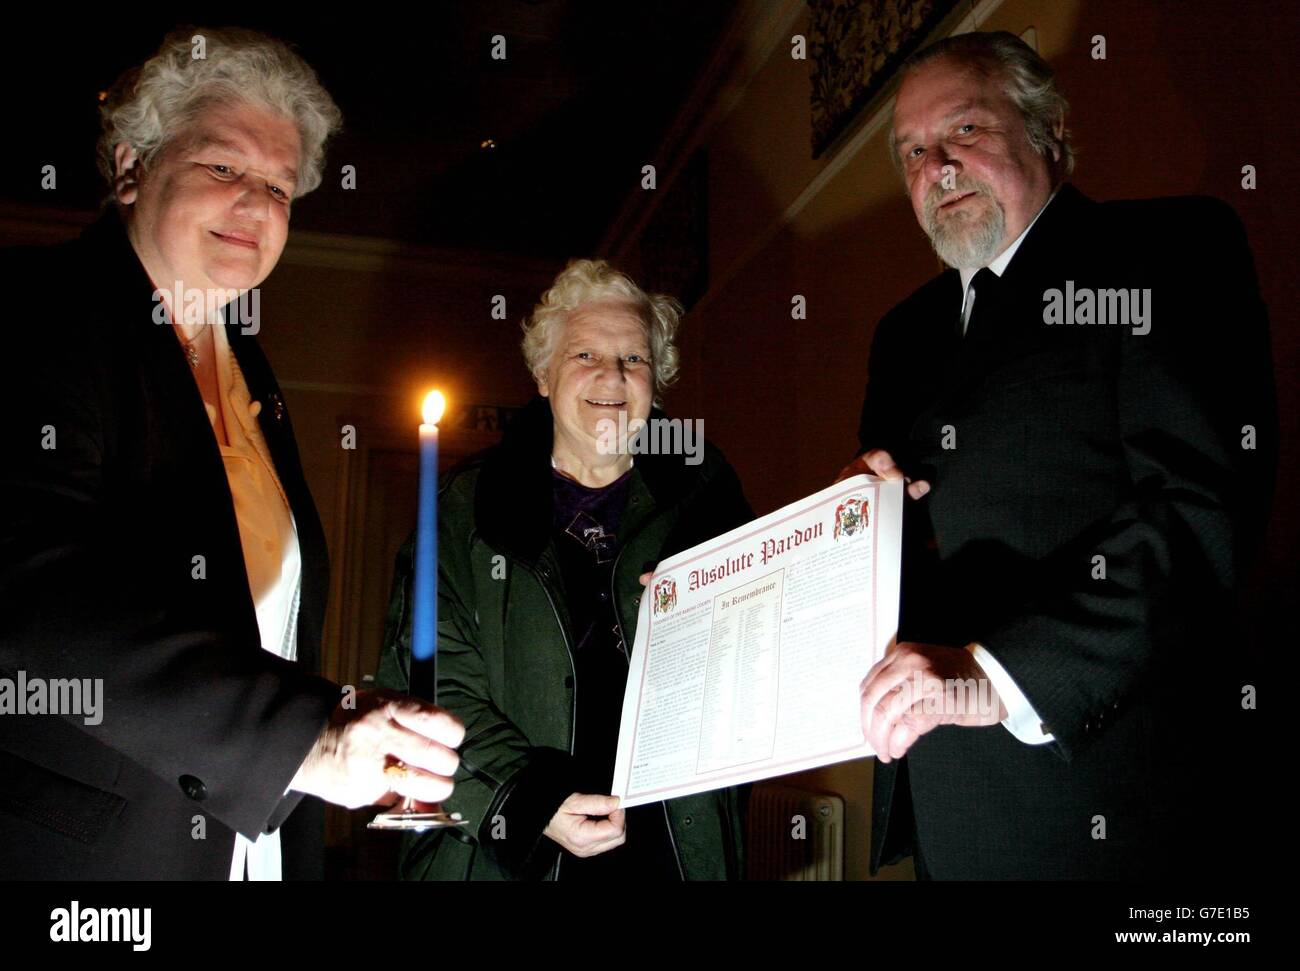 Rena Thomson (left) and Helen Cowan receive a pardon from Rob Gray at Gothenburg Public House Prestonpans near Edinburgh, as the town marked Halloween by officially pardoning 81 witches executed more than 400 years ago. Mrs Thomson had six ancestors killed. The pardons were granted under ancient feudal powers due to be abolished within weeks. Descendants and namesakes of those put to death in the town of Prestonpans, East Lothian, during Scotland's 16th and 17th century witch-hunts are expected to attend Sunday's ceremony. Stock Photo